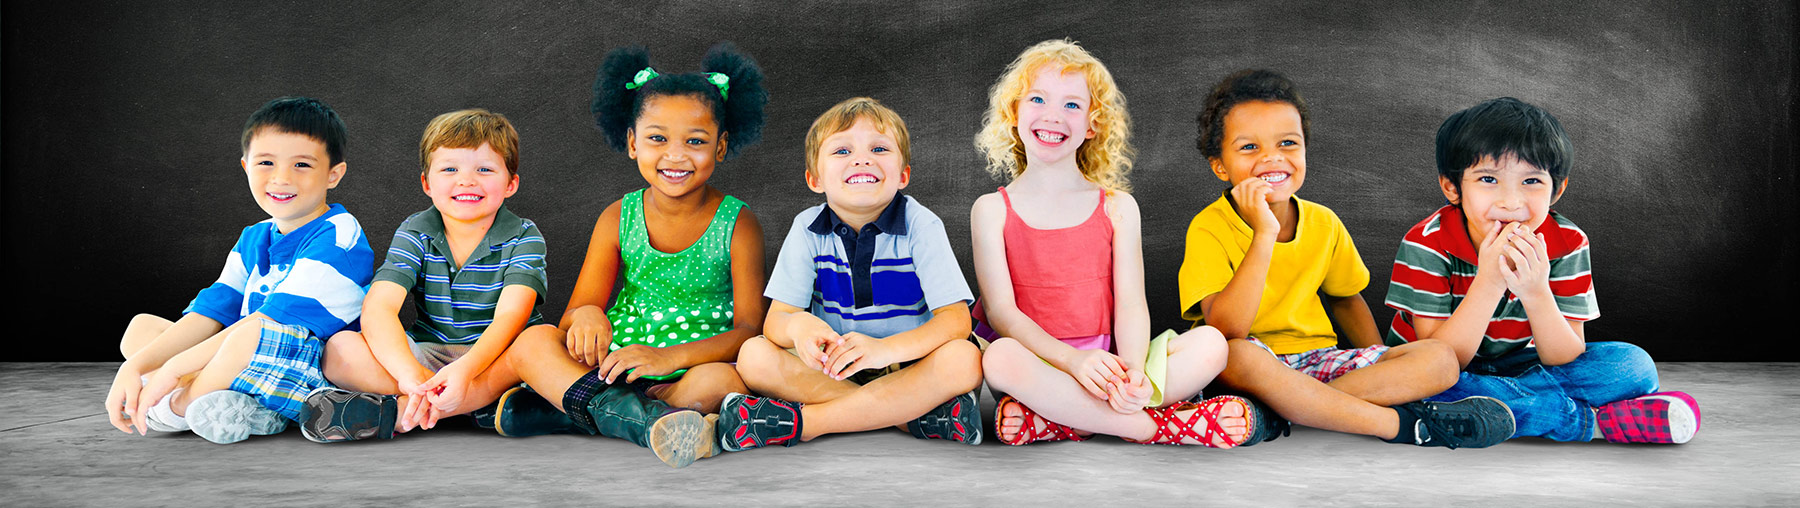 6 young children in colorful clothing, sitting on the ground in  front of a black board.